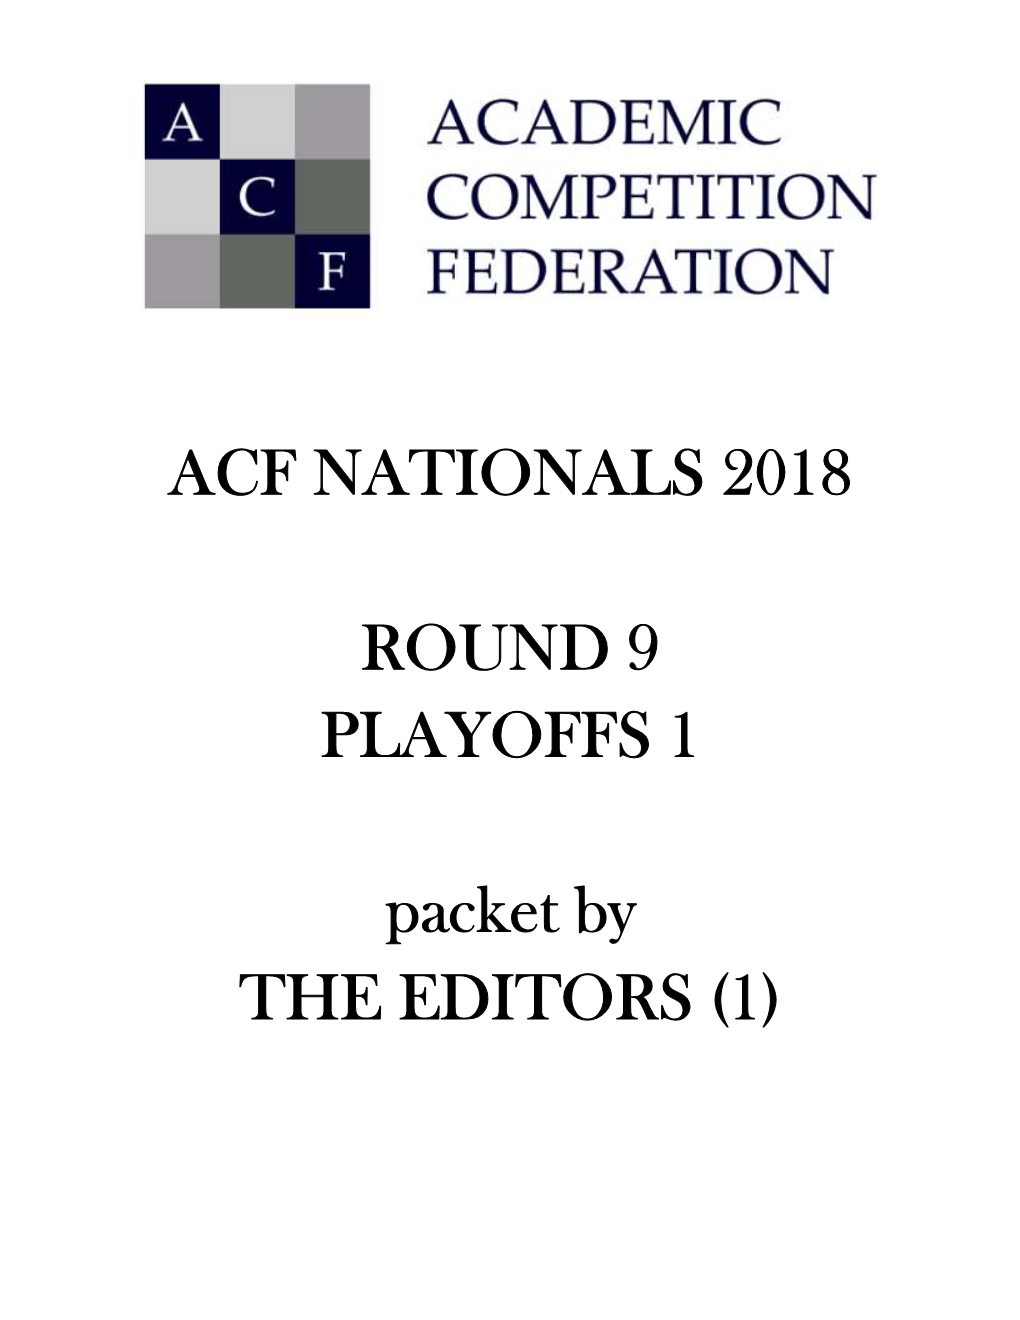 ACF NATIONALS 2018 ROUND 9 PLAYOFFS 1 Packet by THE